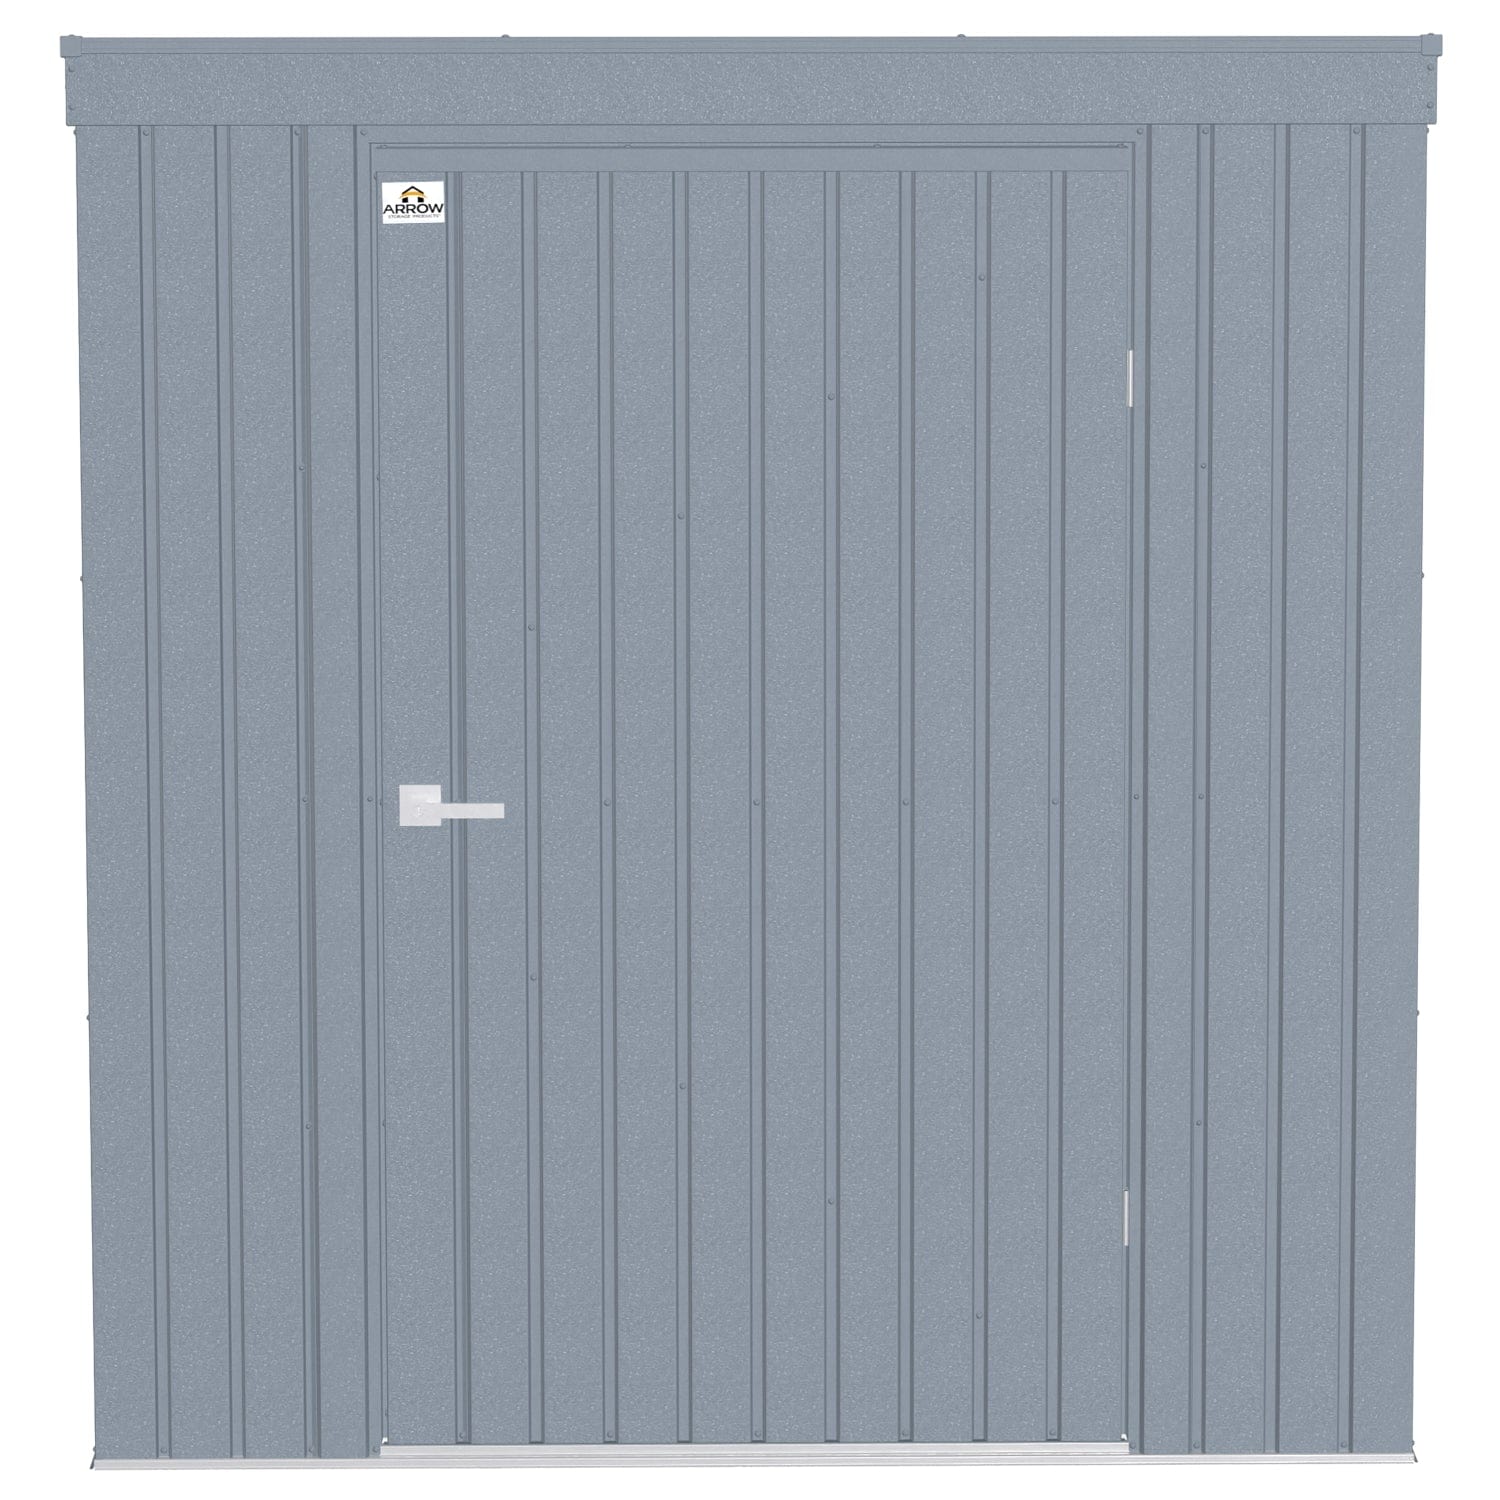 Arrow Sheds & Storage Buildings Arrow | Elite Steel Storage Shed, 6x4 ft. Anthracite EP64AN